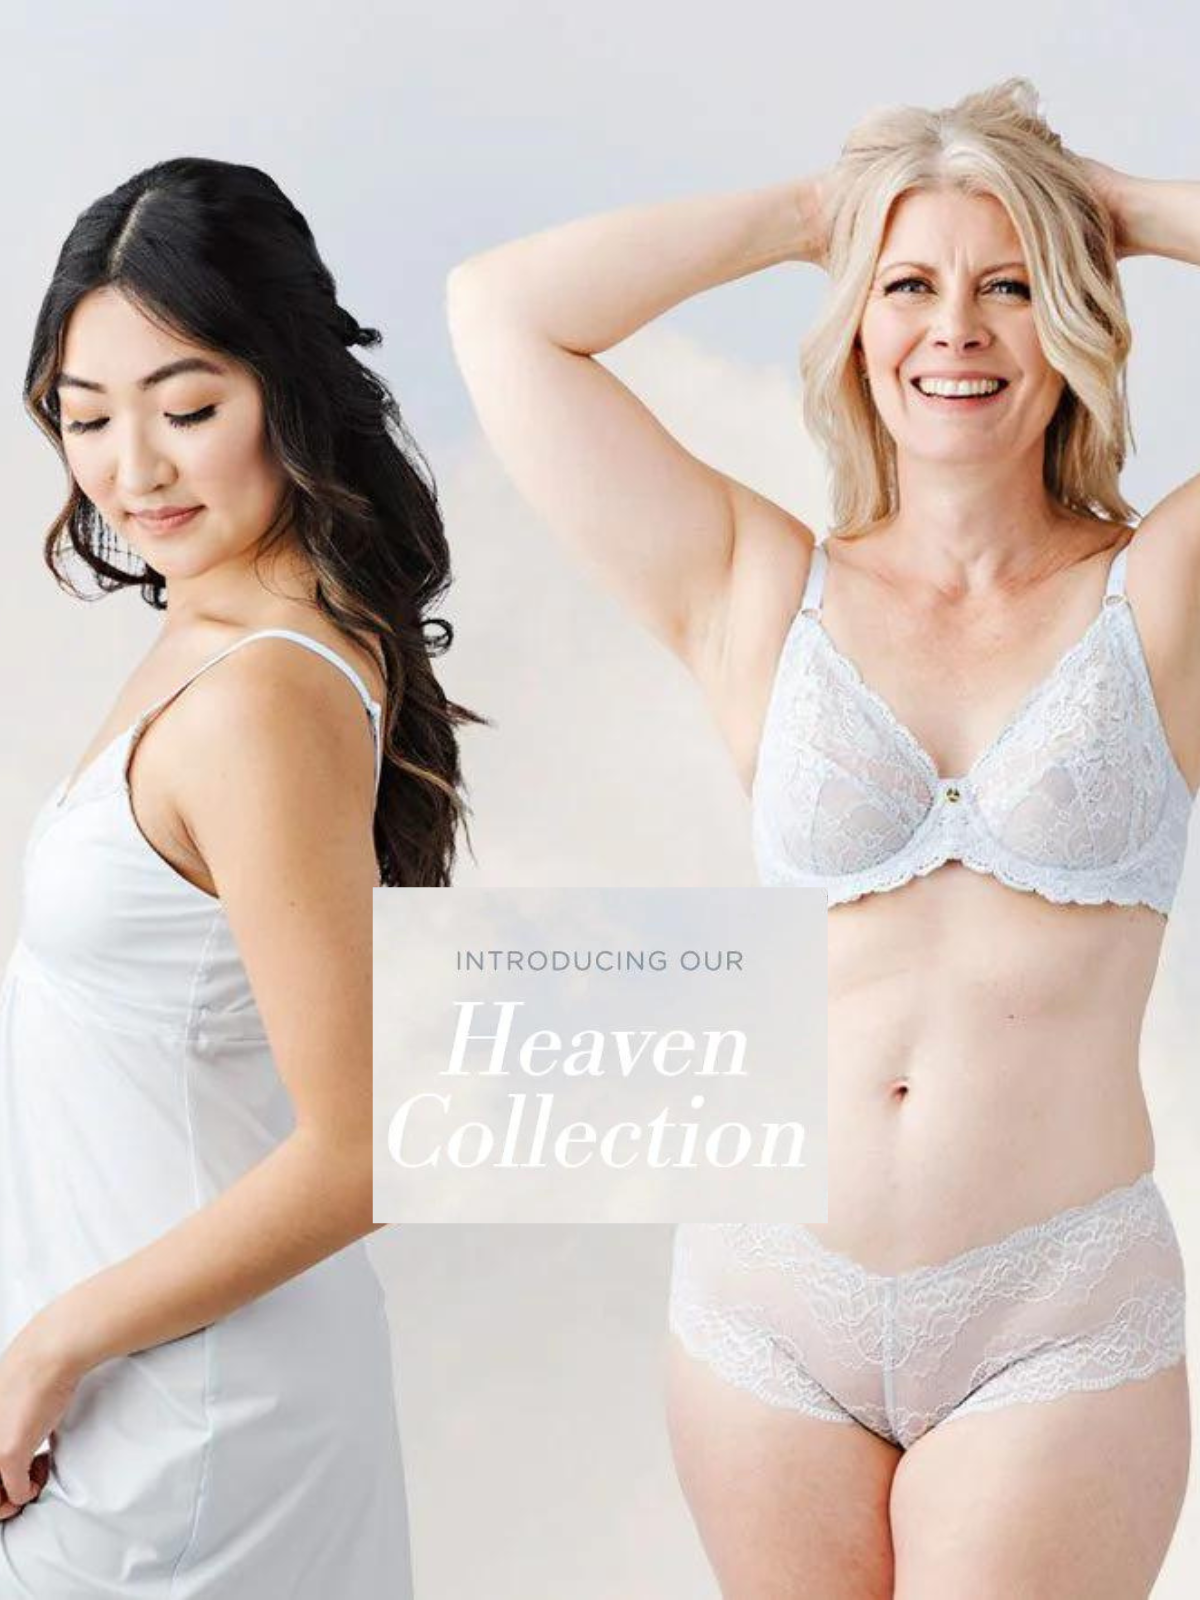 Woman's Bra Clipart Collection